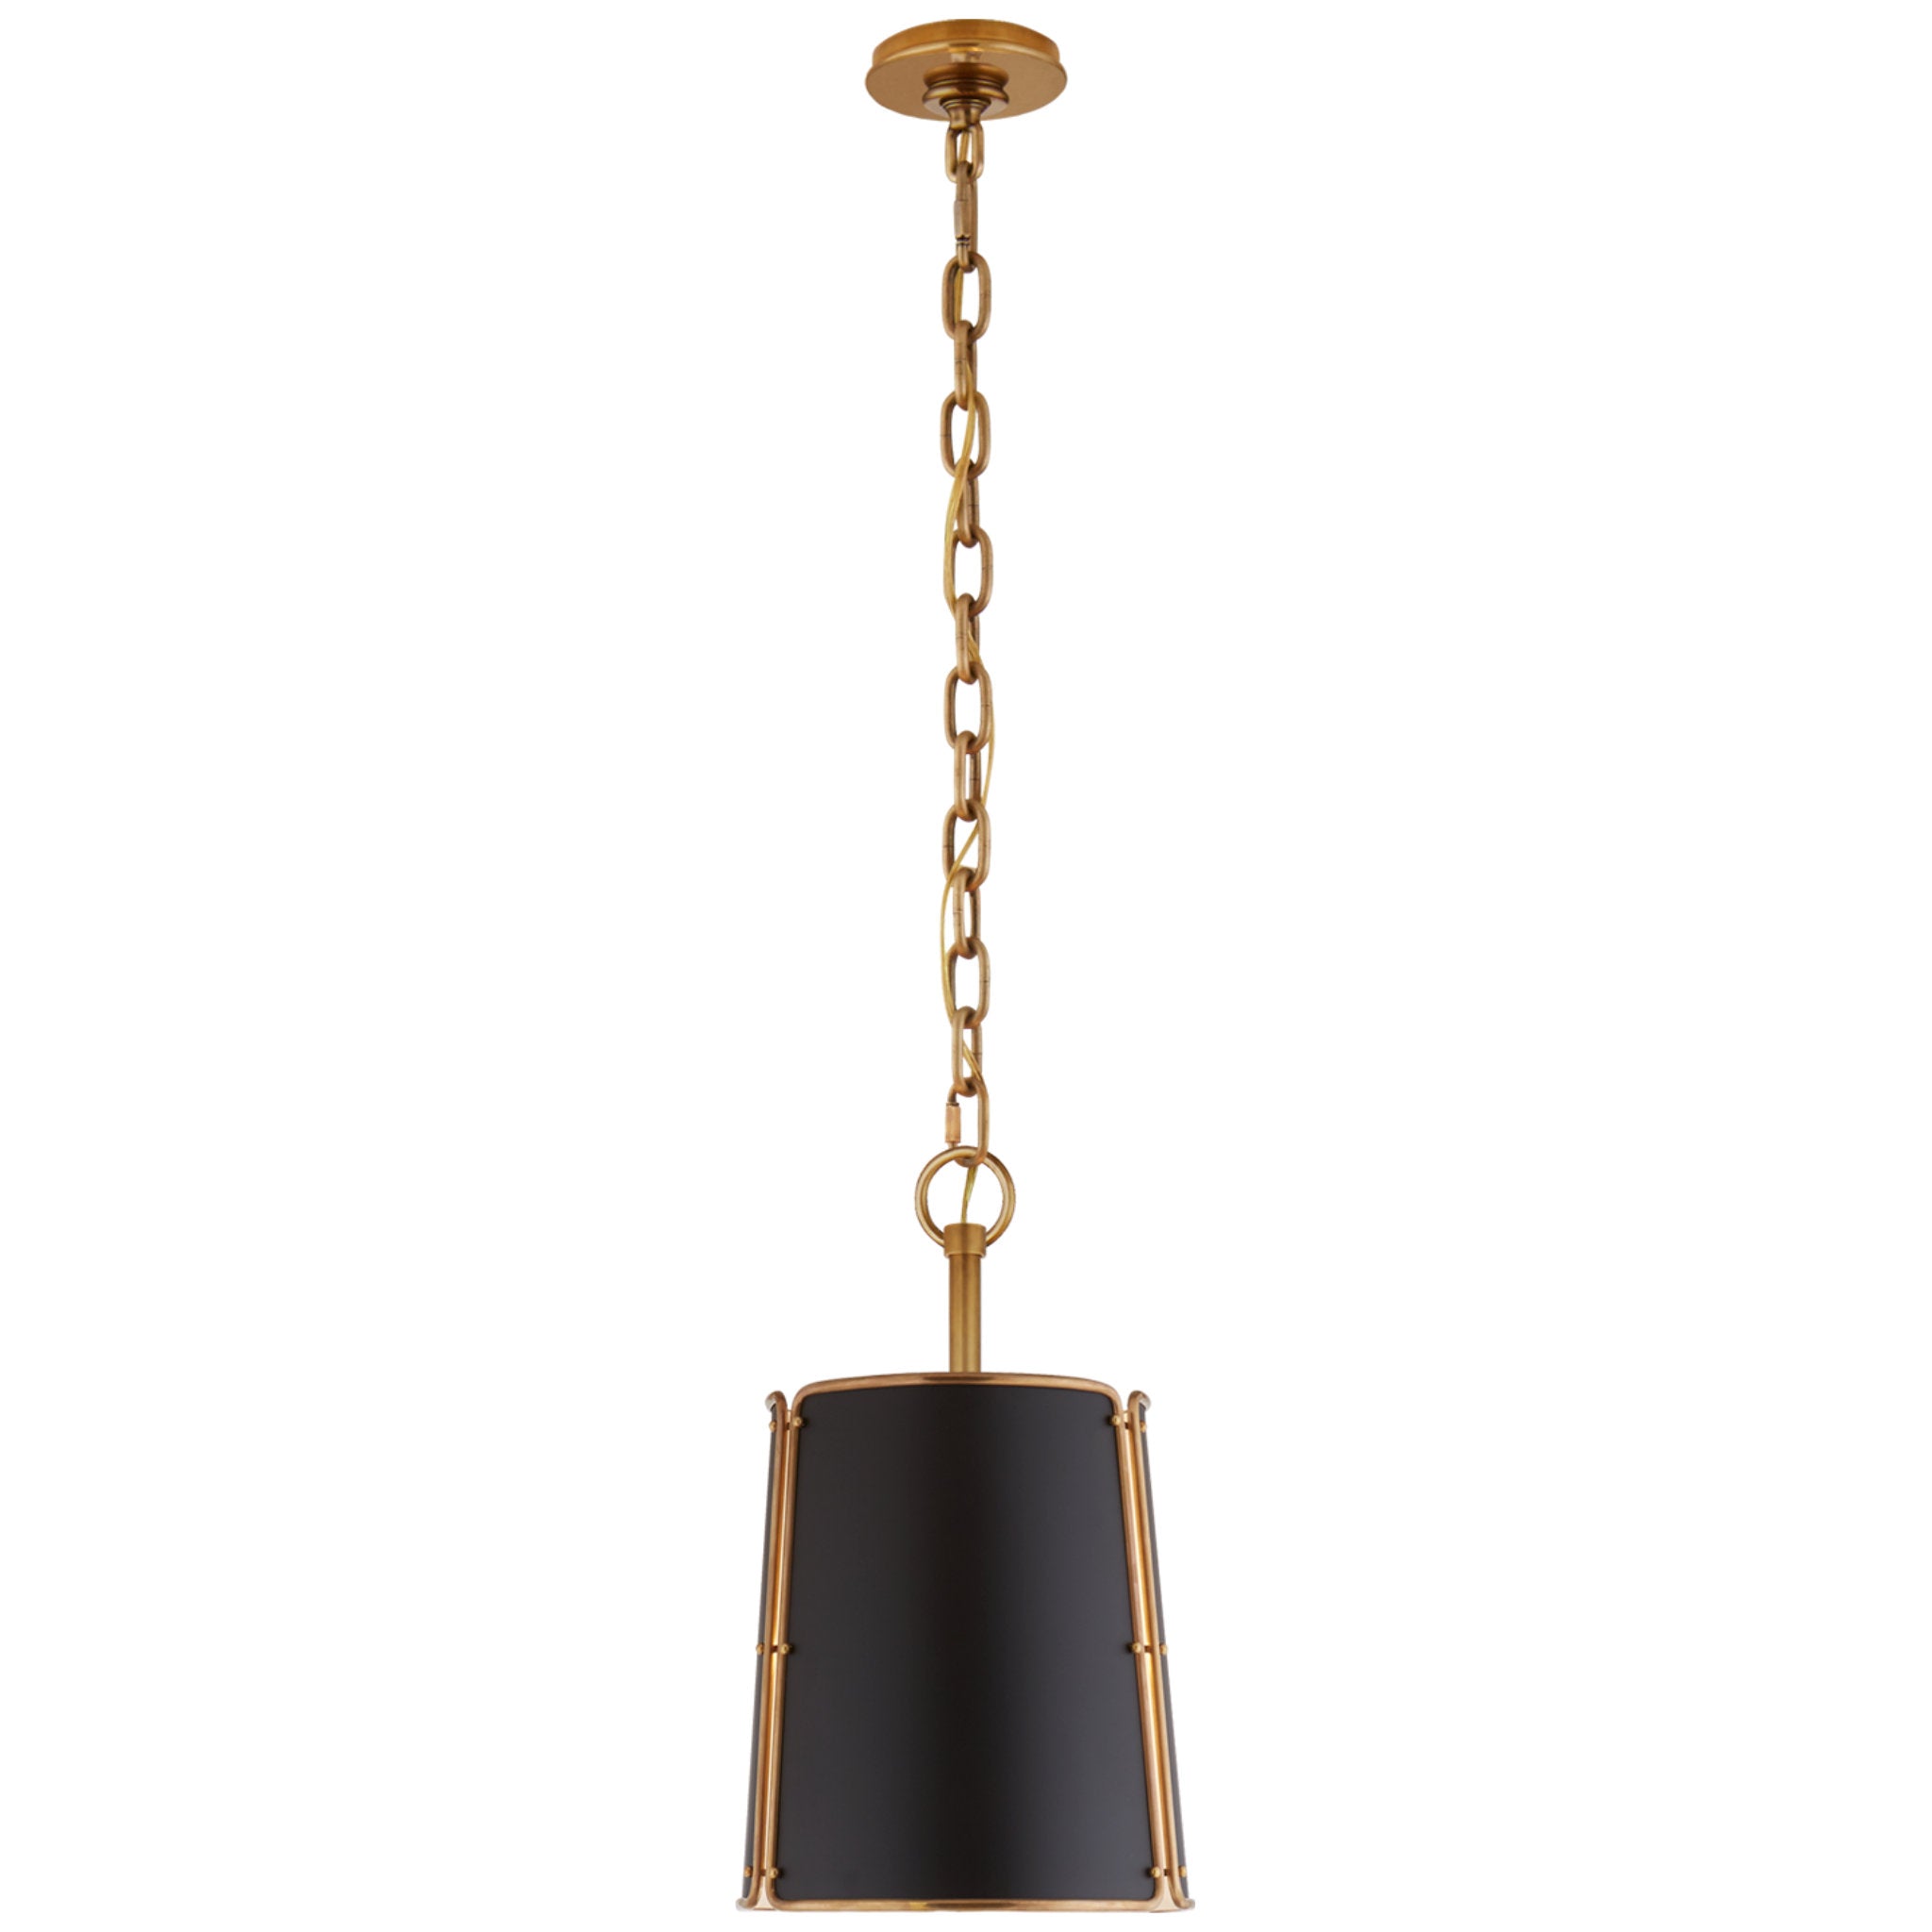 Carrier and Company Hastings Small Pendant in Hand-Rubbed Antique Brass with Black Shade